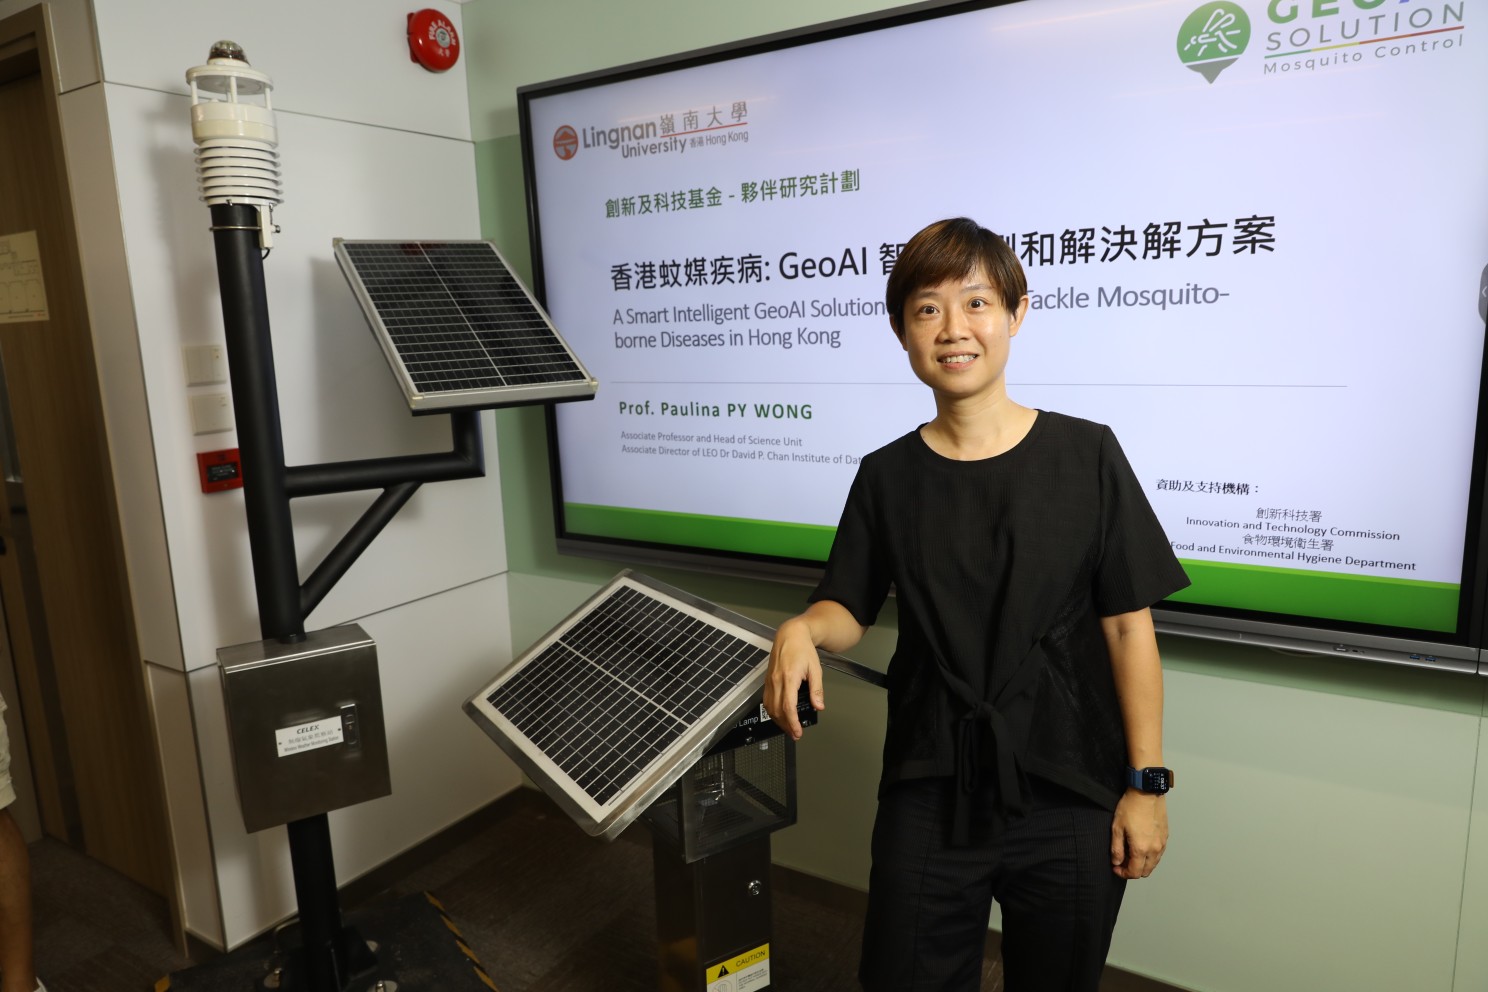 The GeoAI Cloud Analytics Platform developed by Prof Paulina Wong Pui-yun, Head of the Science Unit of Lingnan University, provides the general public with a Mosquito Risk Index and Mosquito Risk Map so they can avoid going to areas with serious mosquito 